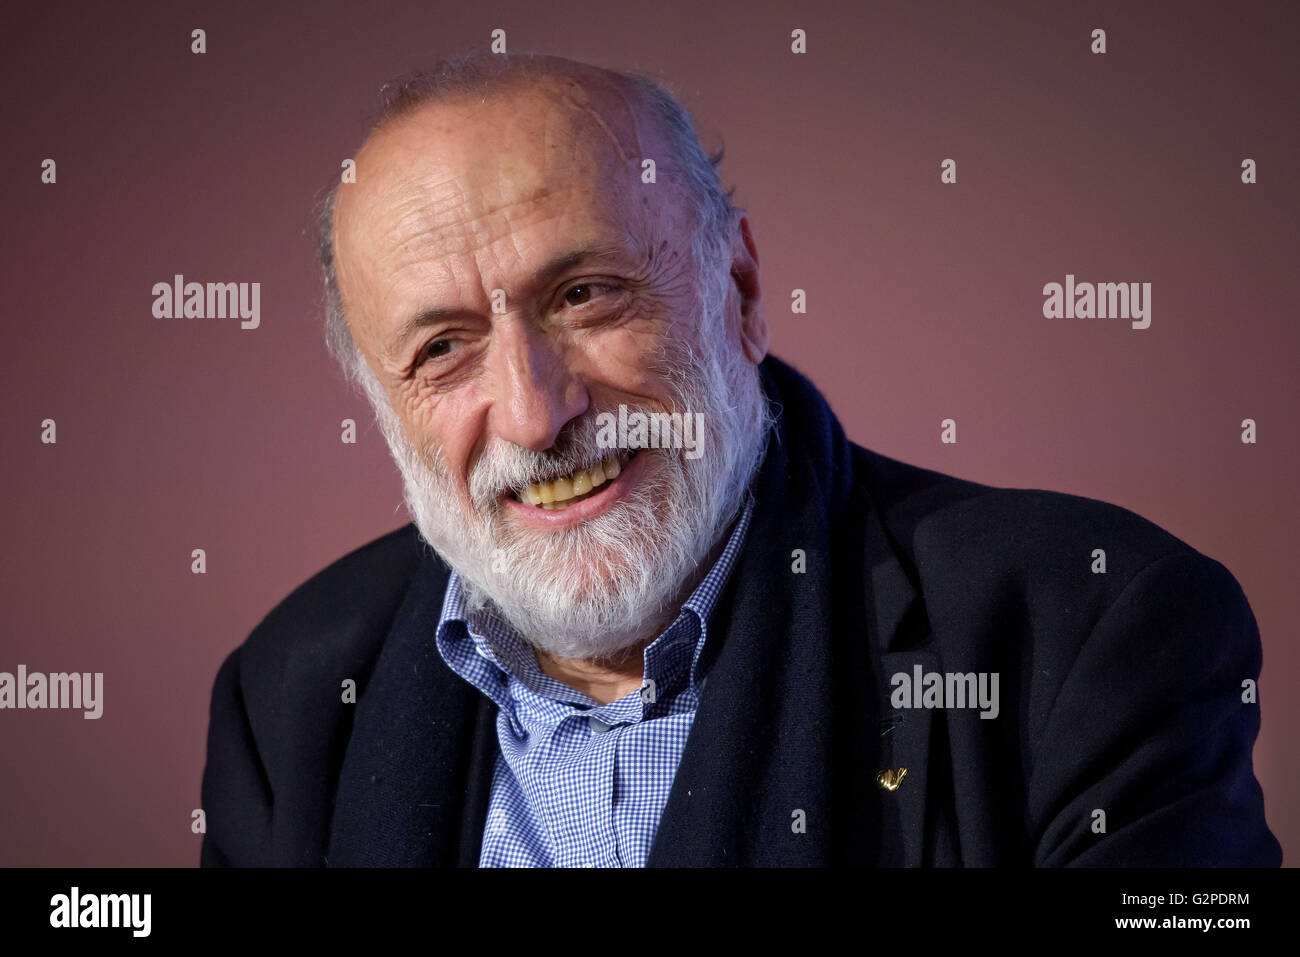 Carlo Petrini President and Founder of the Slow Food Movement Stock Photo